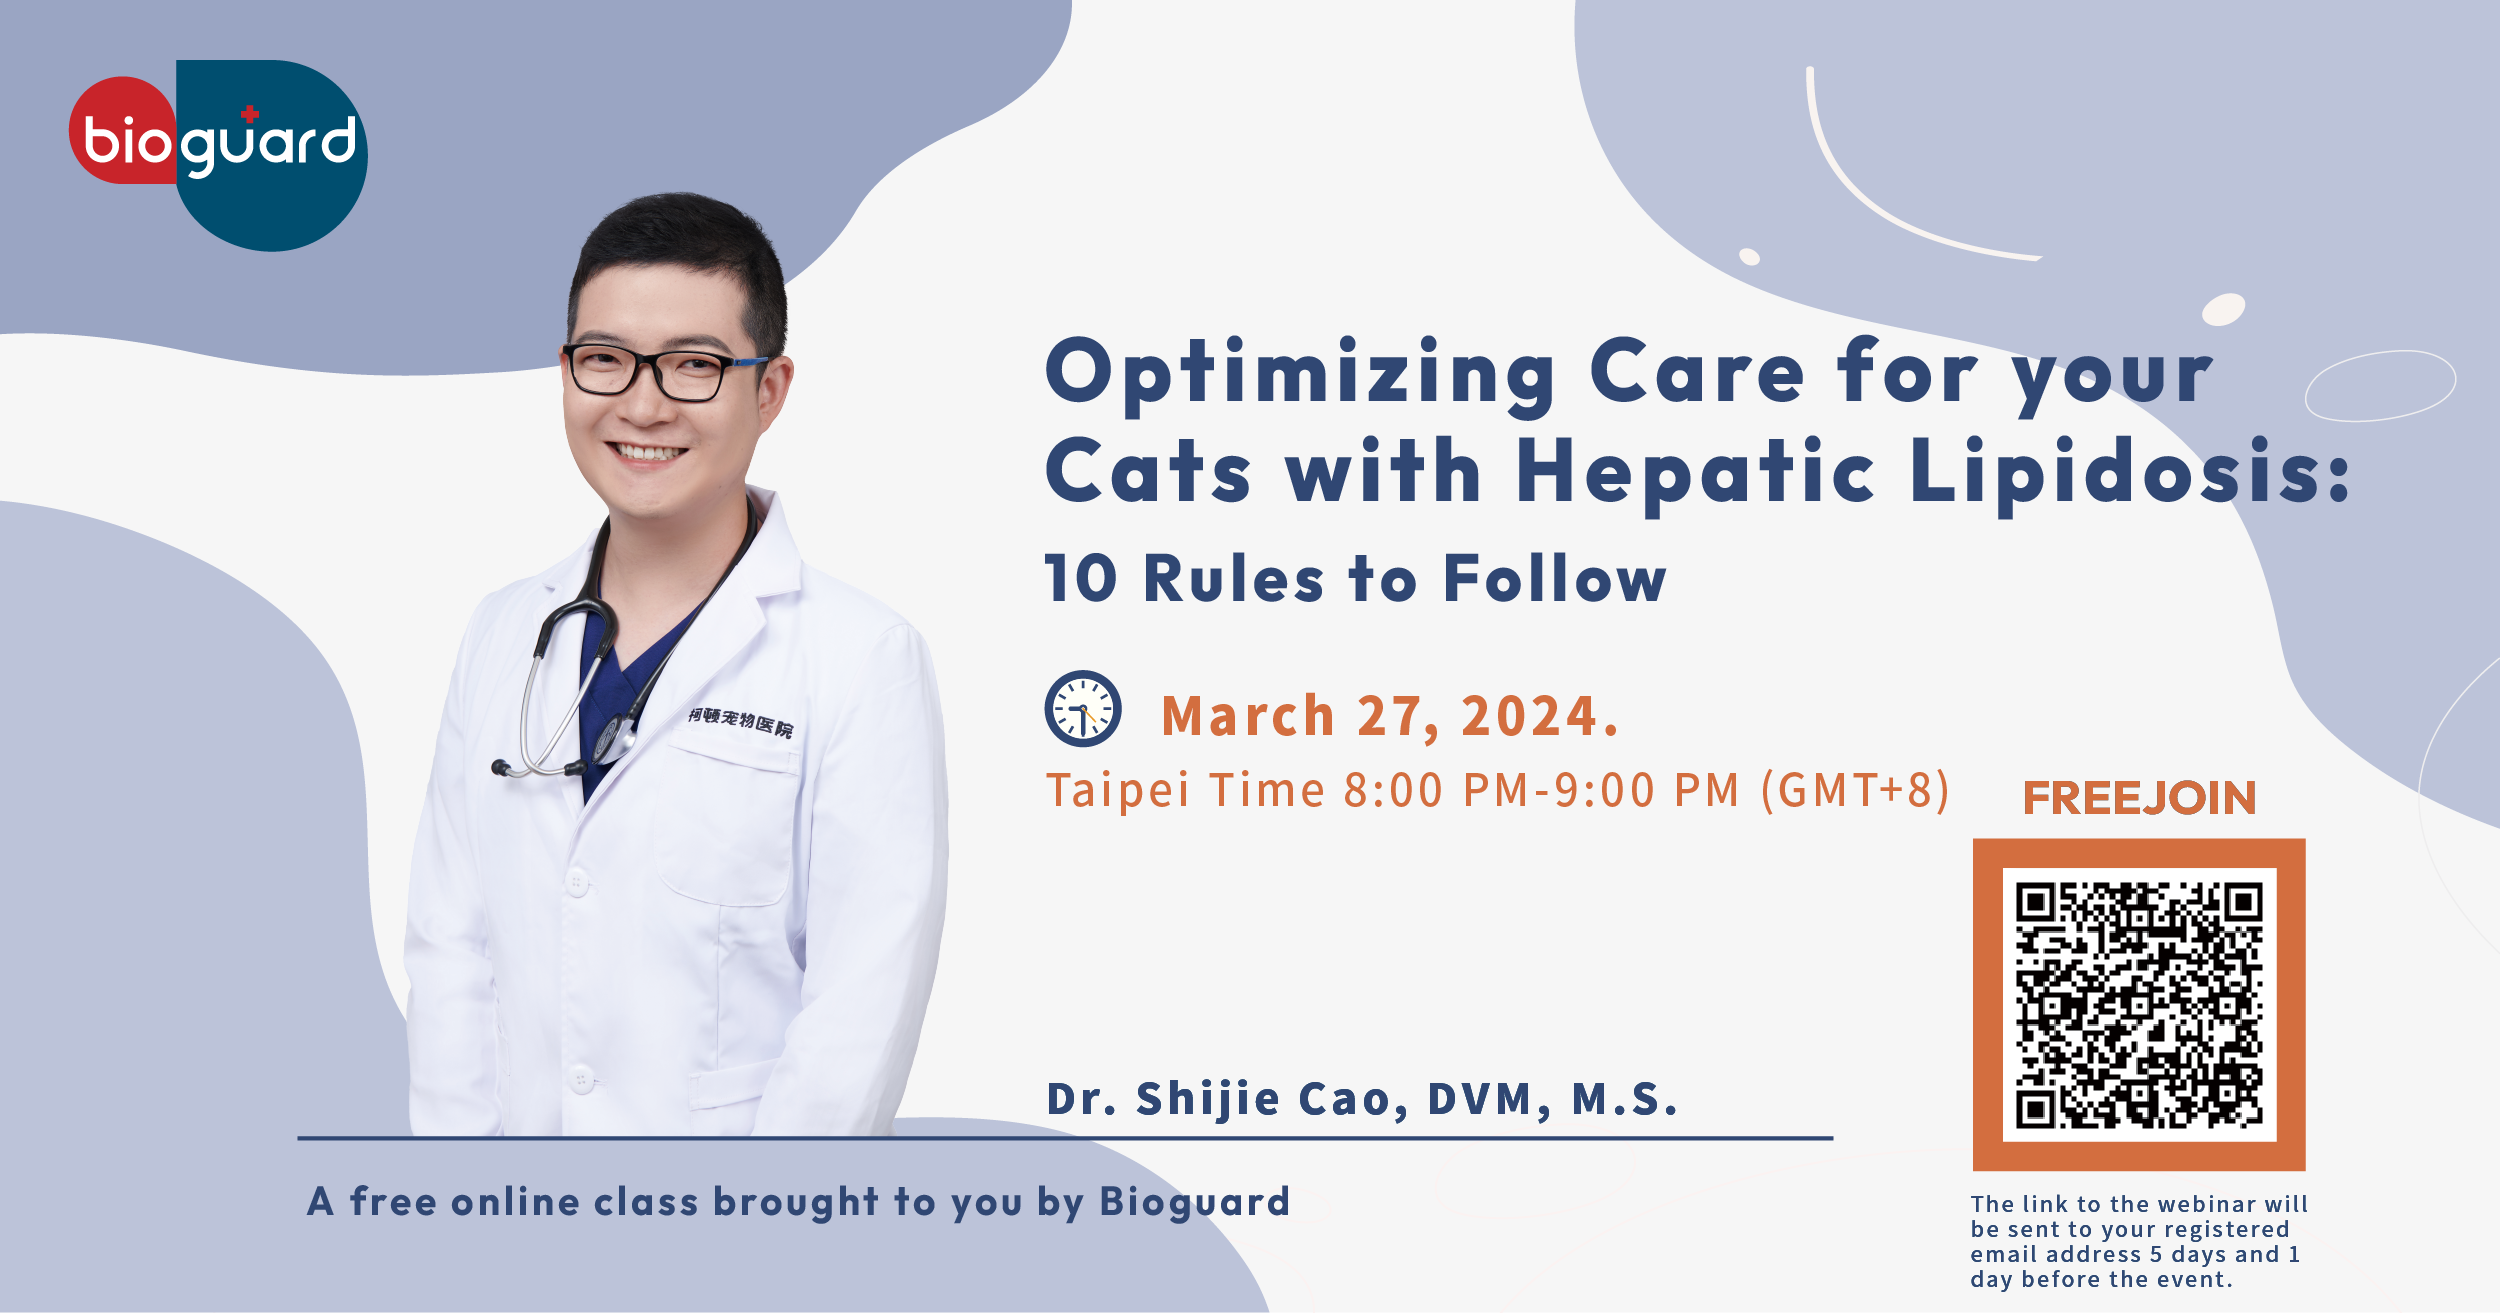 Optimizing Care for your Cats with Hepatic Lipidosis: 10 Rules to Follow